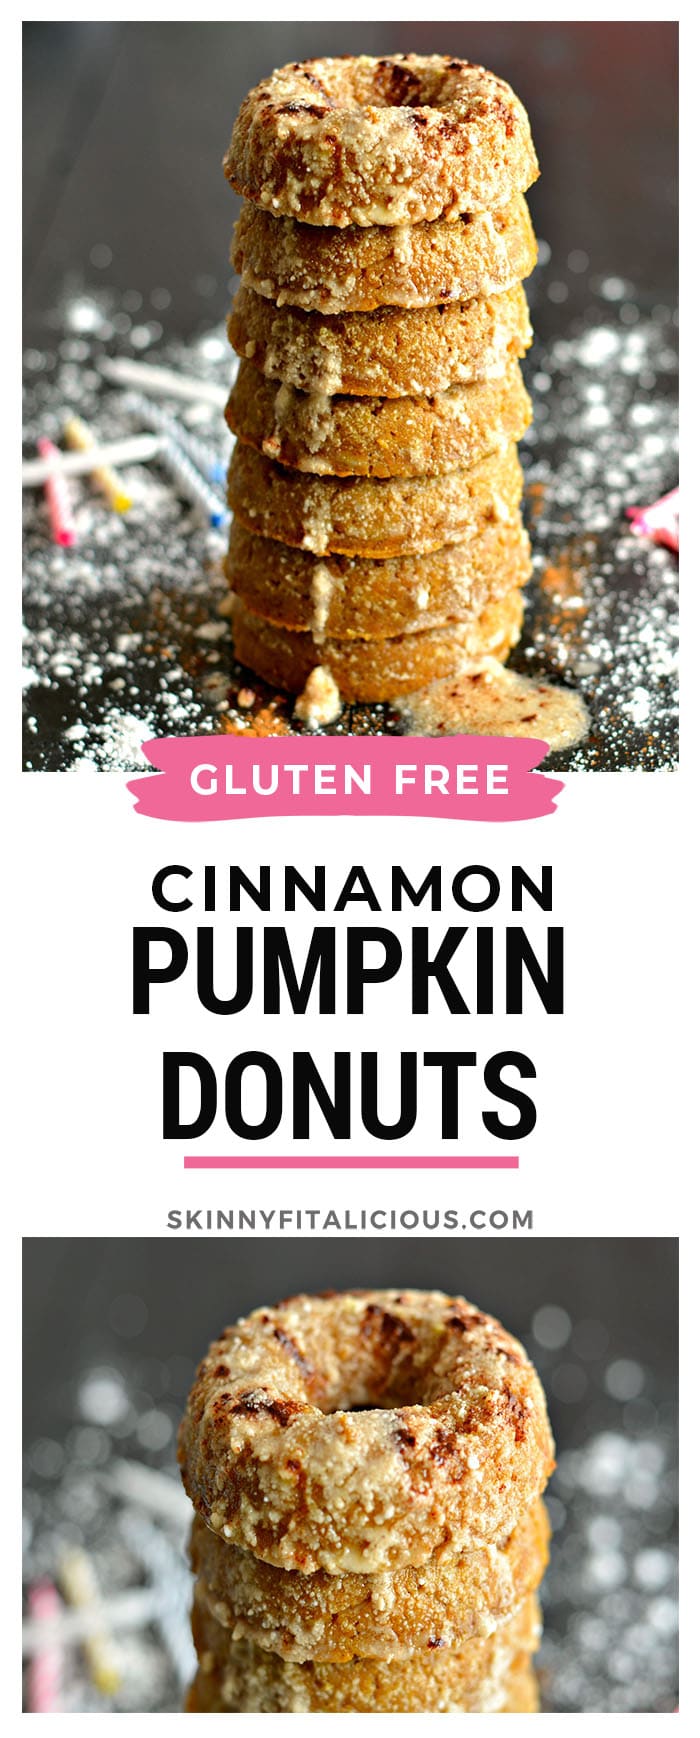 Treat yourself to gluten free Cinnamon Glazed Pumpkin Donuts made with less fat, less sugar and less calories and a lot of flavor. Perfect special occasion treat! Gluten Free + Low Calorie